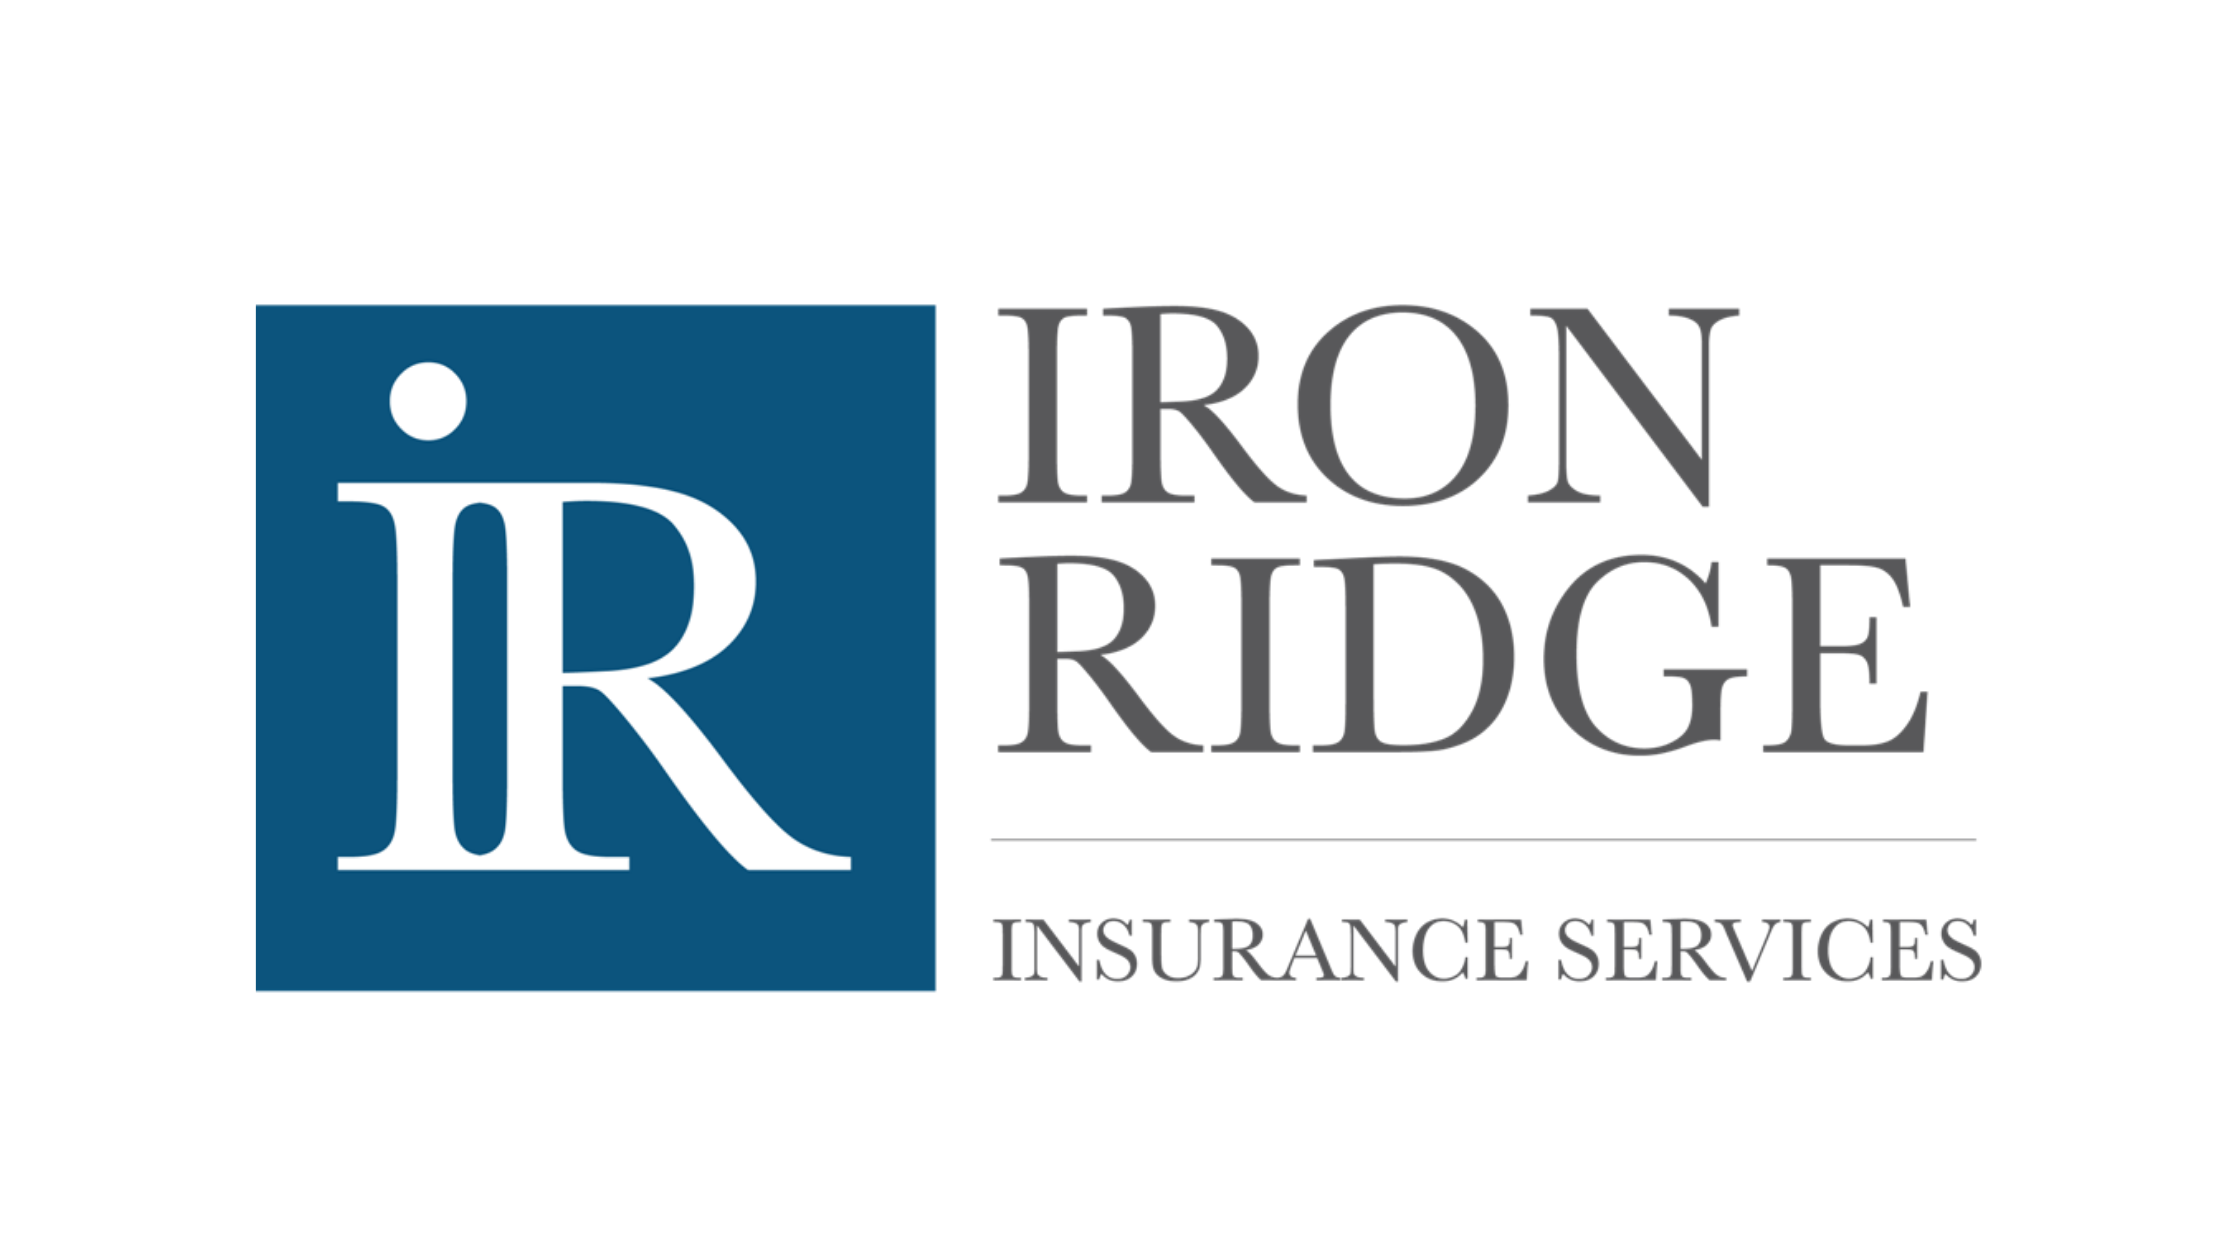 Iron Ridge Insurance Services supports local youth as presenting sponsor of OneDigital Sunrise Rotary Pro-Am